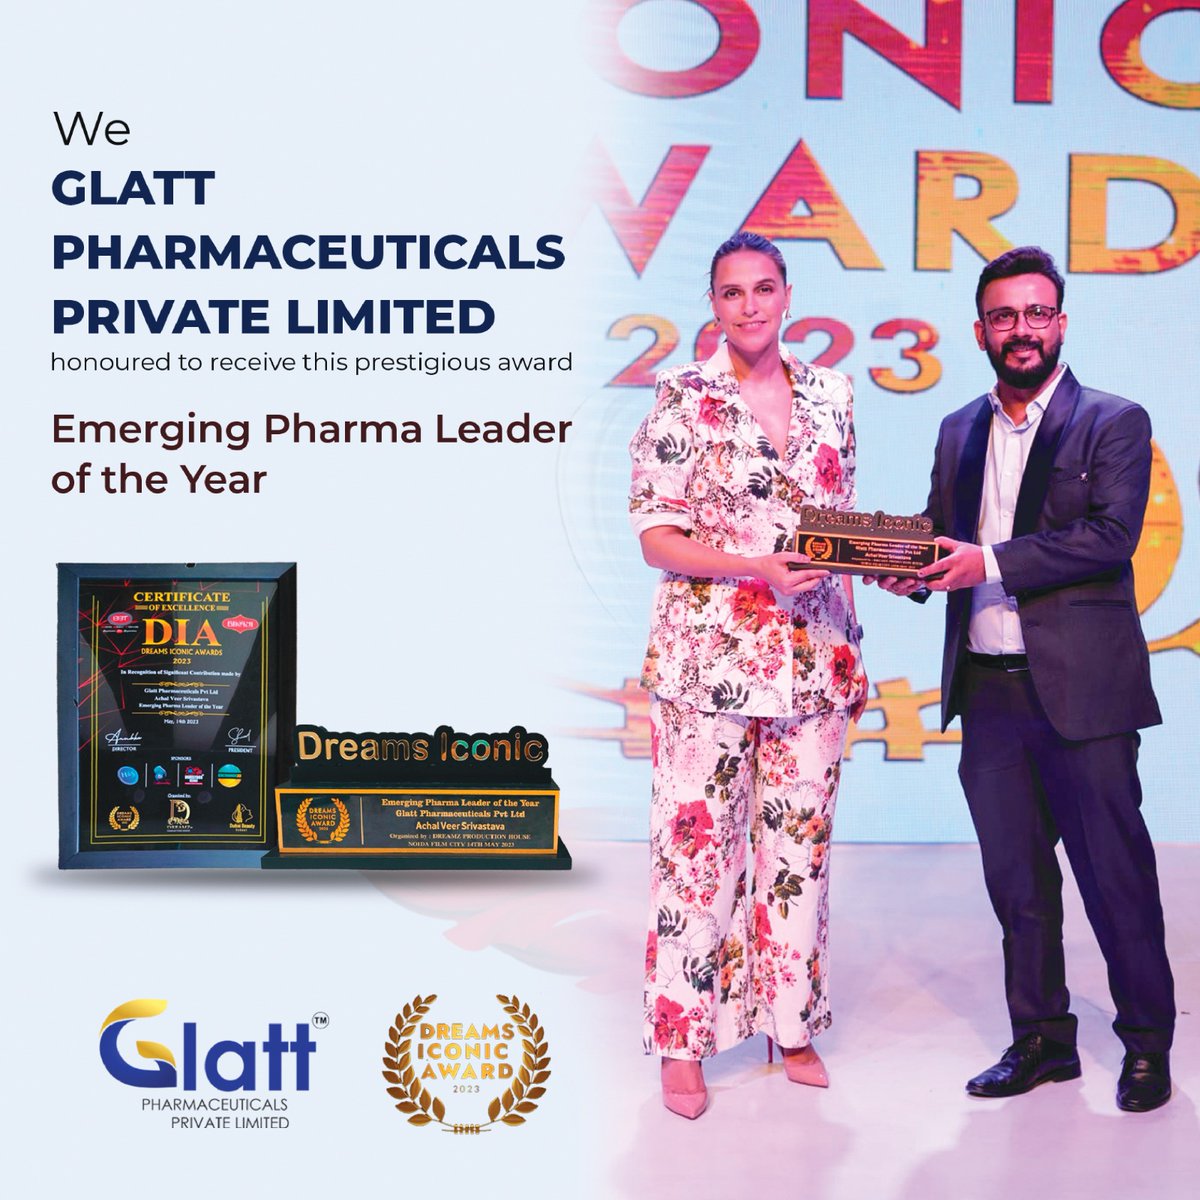 Honored to receive the  Dreams Iconic Award for Best Emerging Pharma Leader of the Year from the amazing @NehaDhupia! 🏆💊 

#PharmaExcellence #Grateful #AVS #AVSRule #achalveer